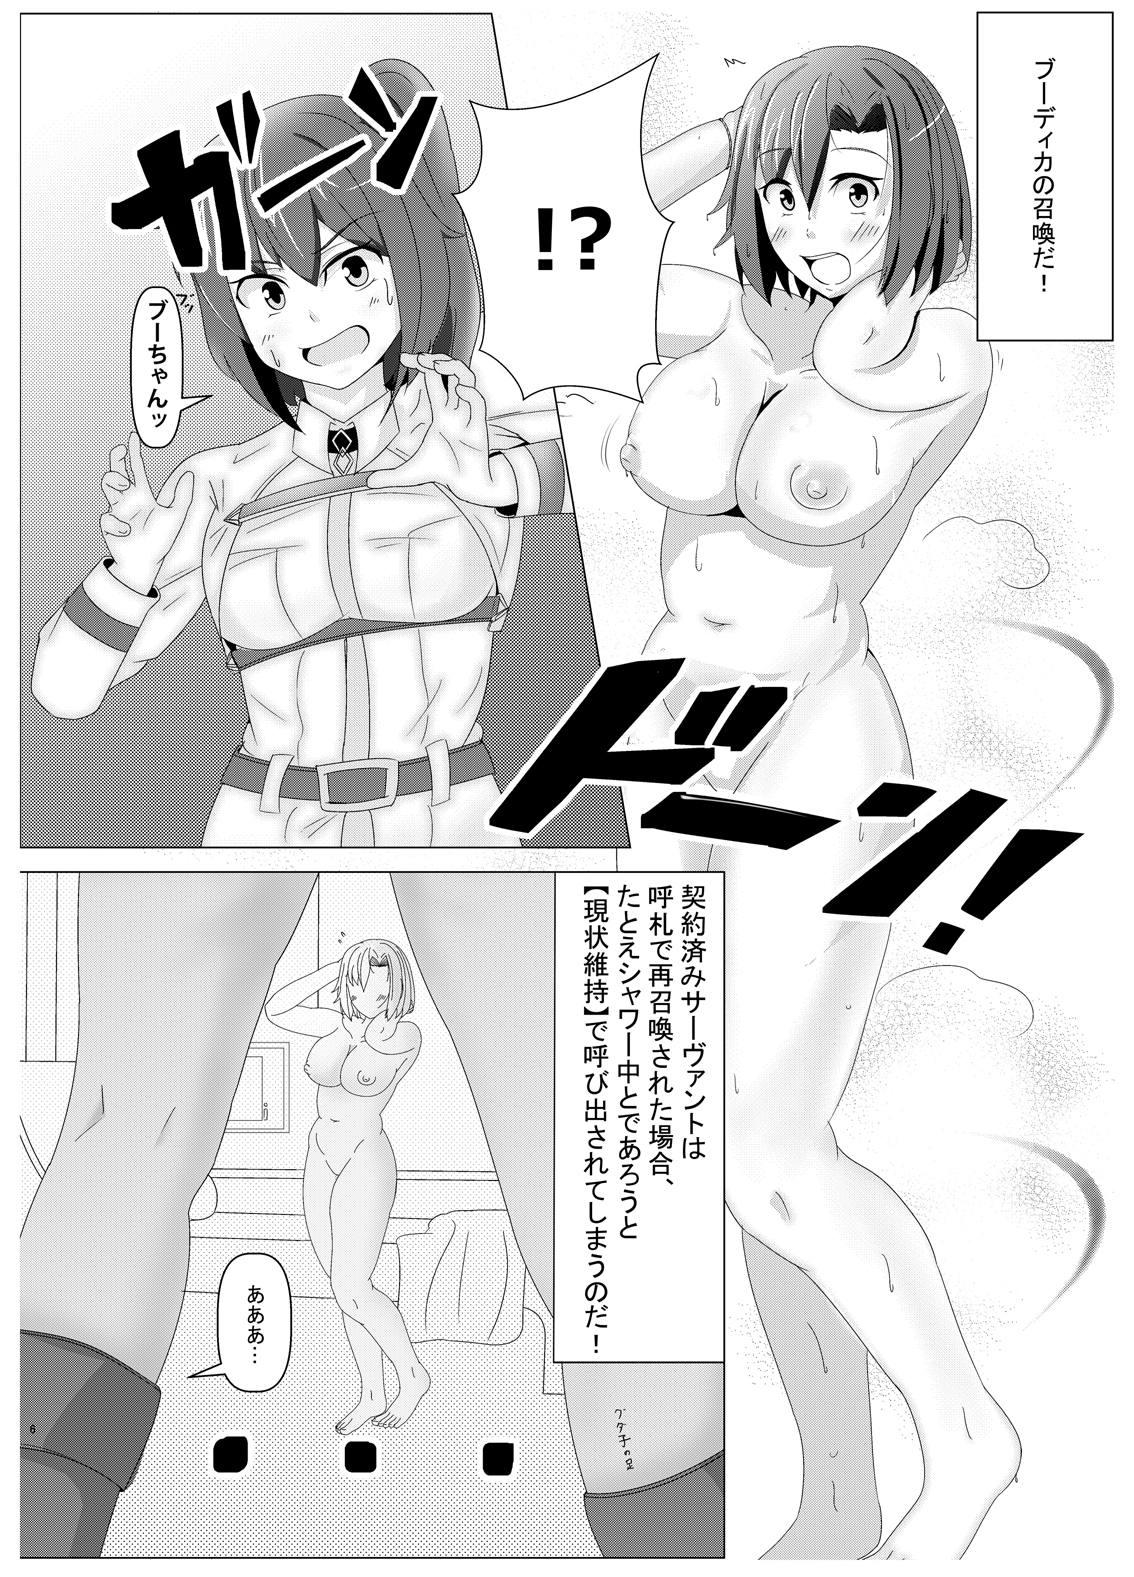 Hot Women Having Sex Summon Rider Boudica - Fate grand order Cougar - Page 5